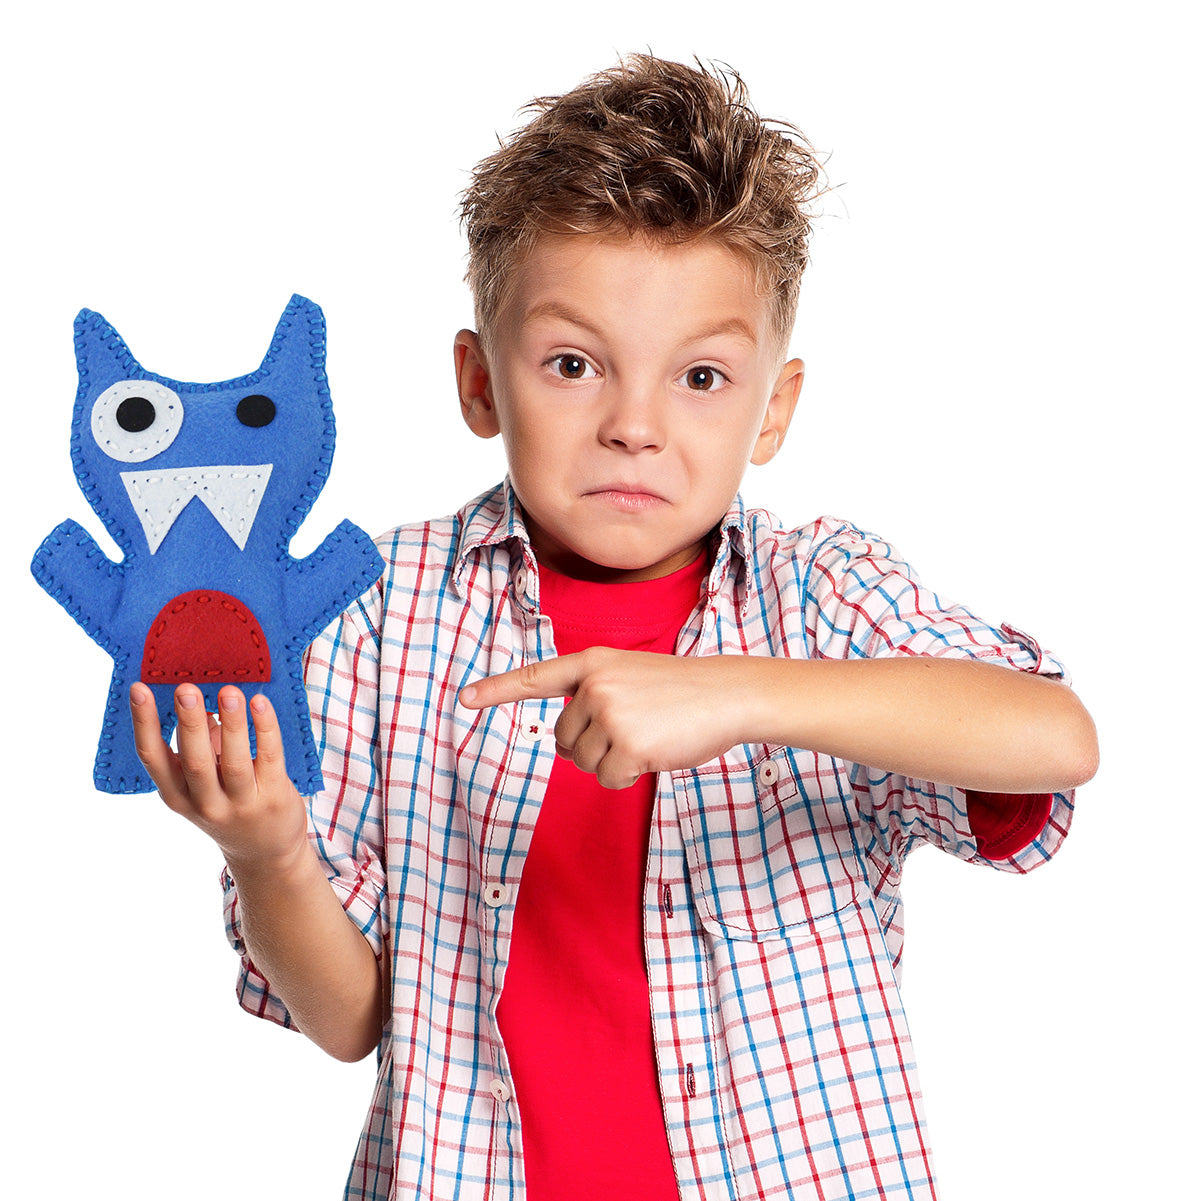 Make your Monster - A DIY sewing kit for kids - Blue with horns –  petitloulou